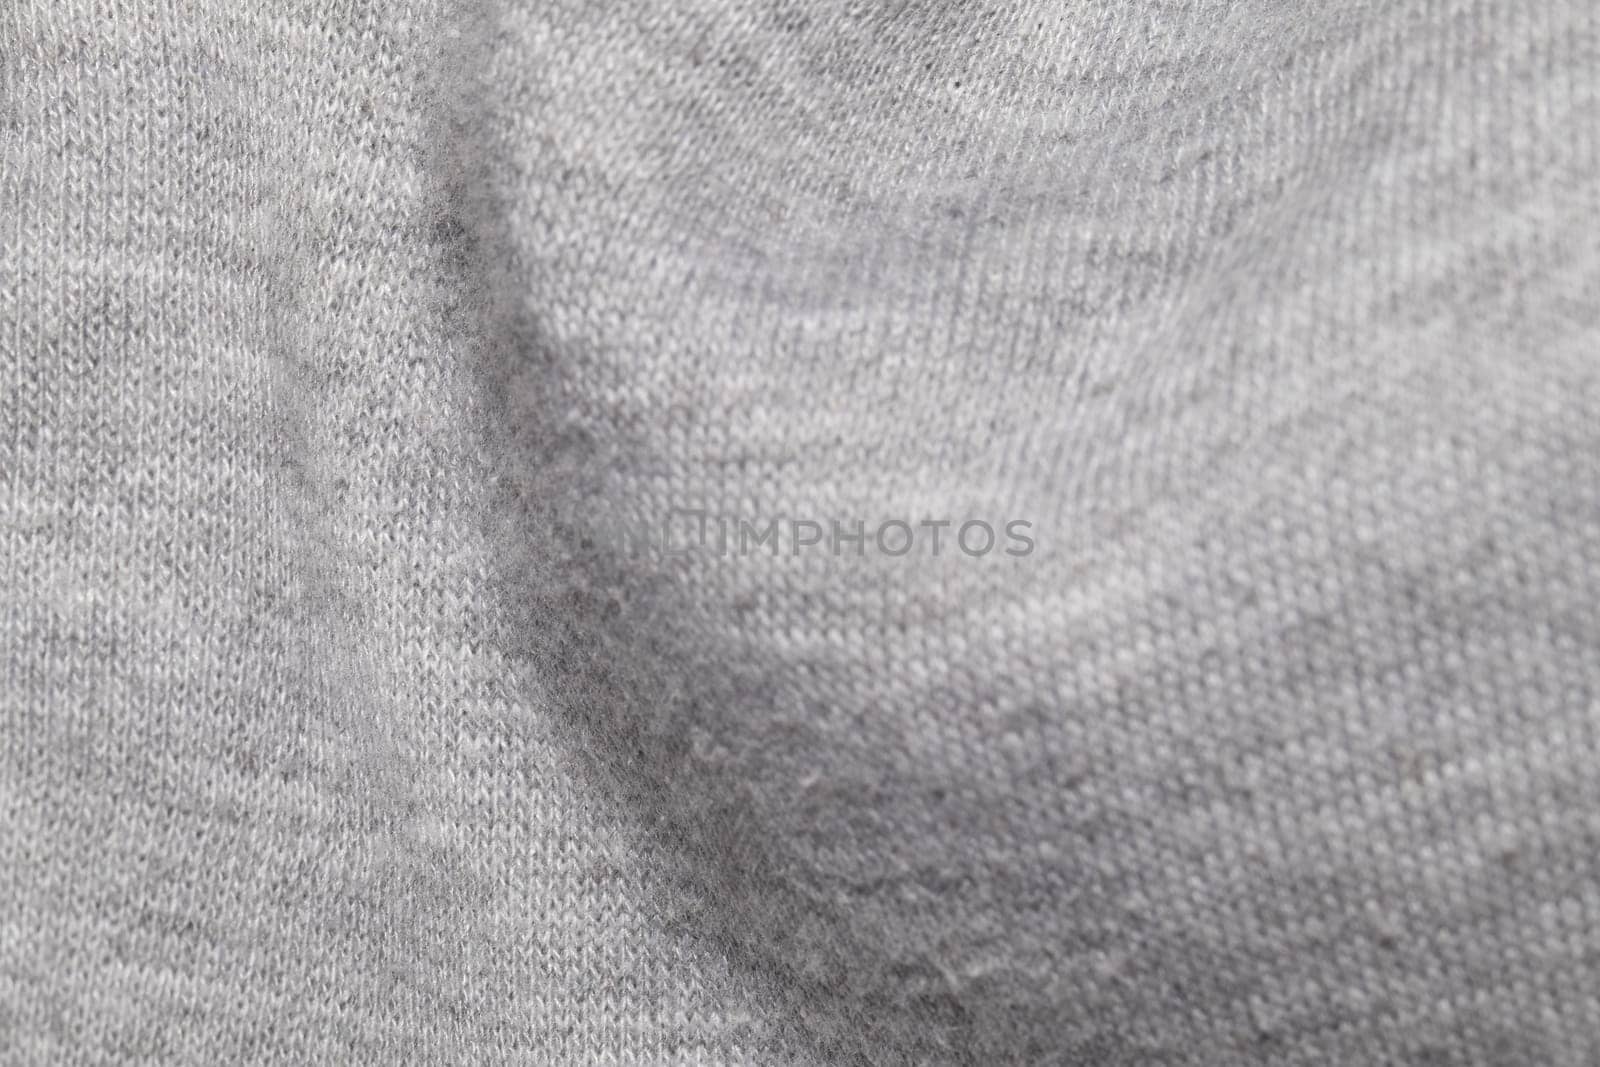 This image shows a close-up view of a gray knitted fabric, highlighting the intricate texture and weave pattern.